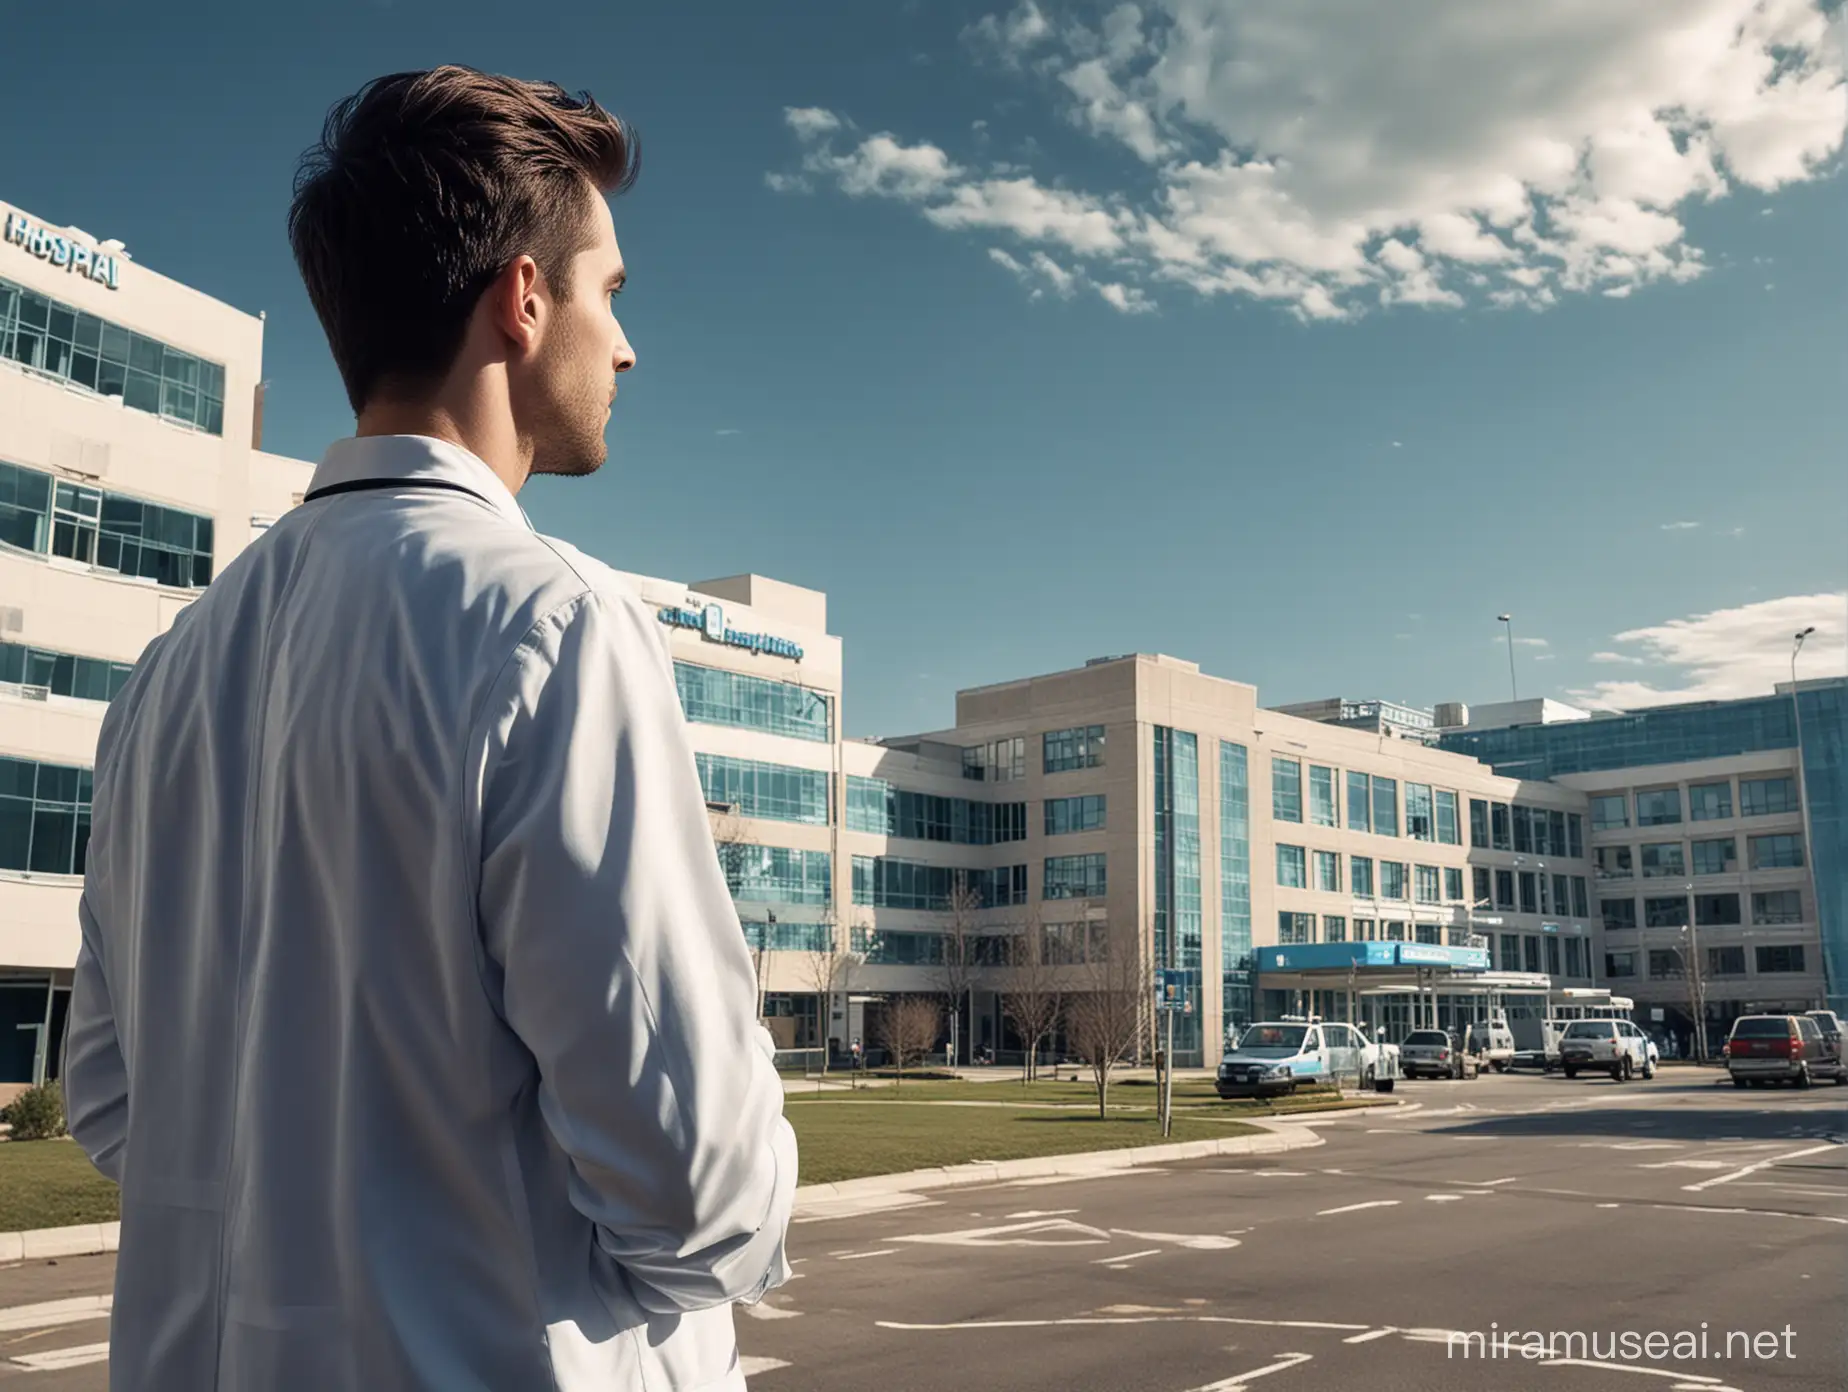 i want a realistic photo of a man back to the camera in wide shot, the man is looking at an hospital, the hospital is a modern hospital, the sky is shine and blue, the man as 28 years old and it is a student